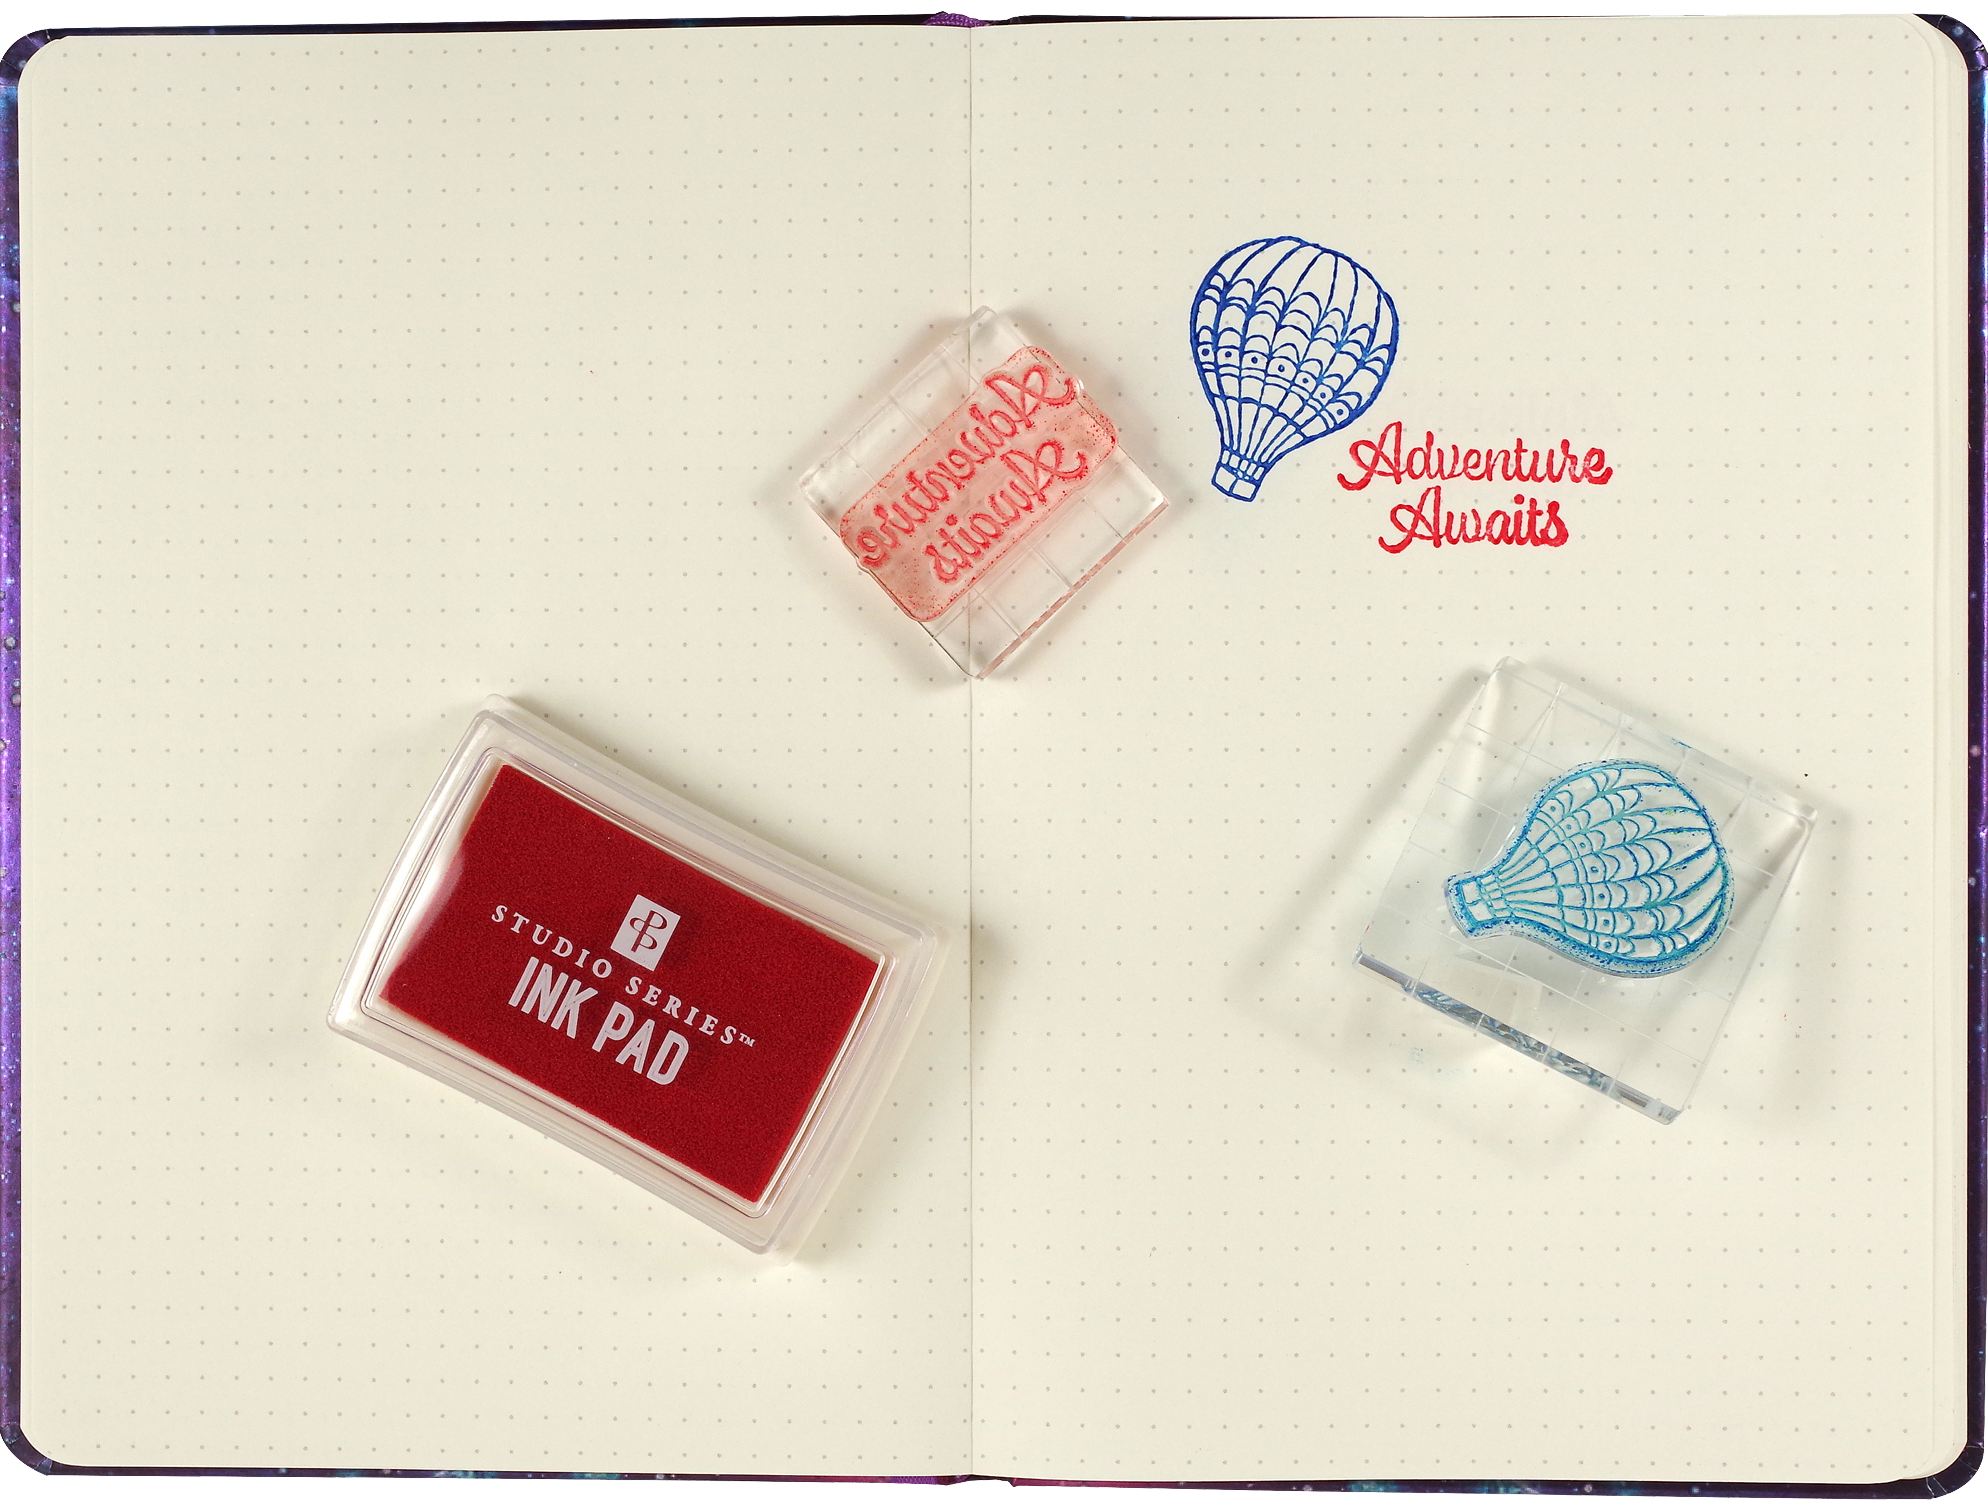 Travel Clear Stamp Set